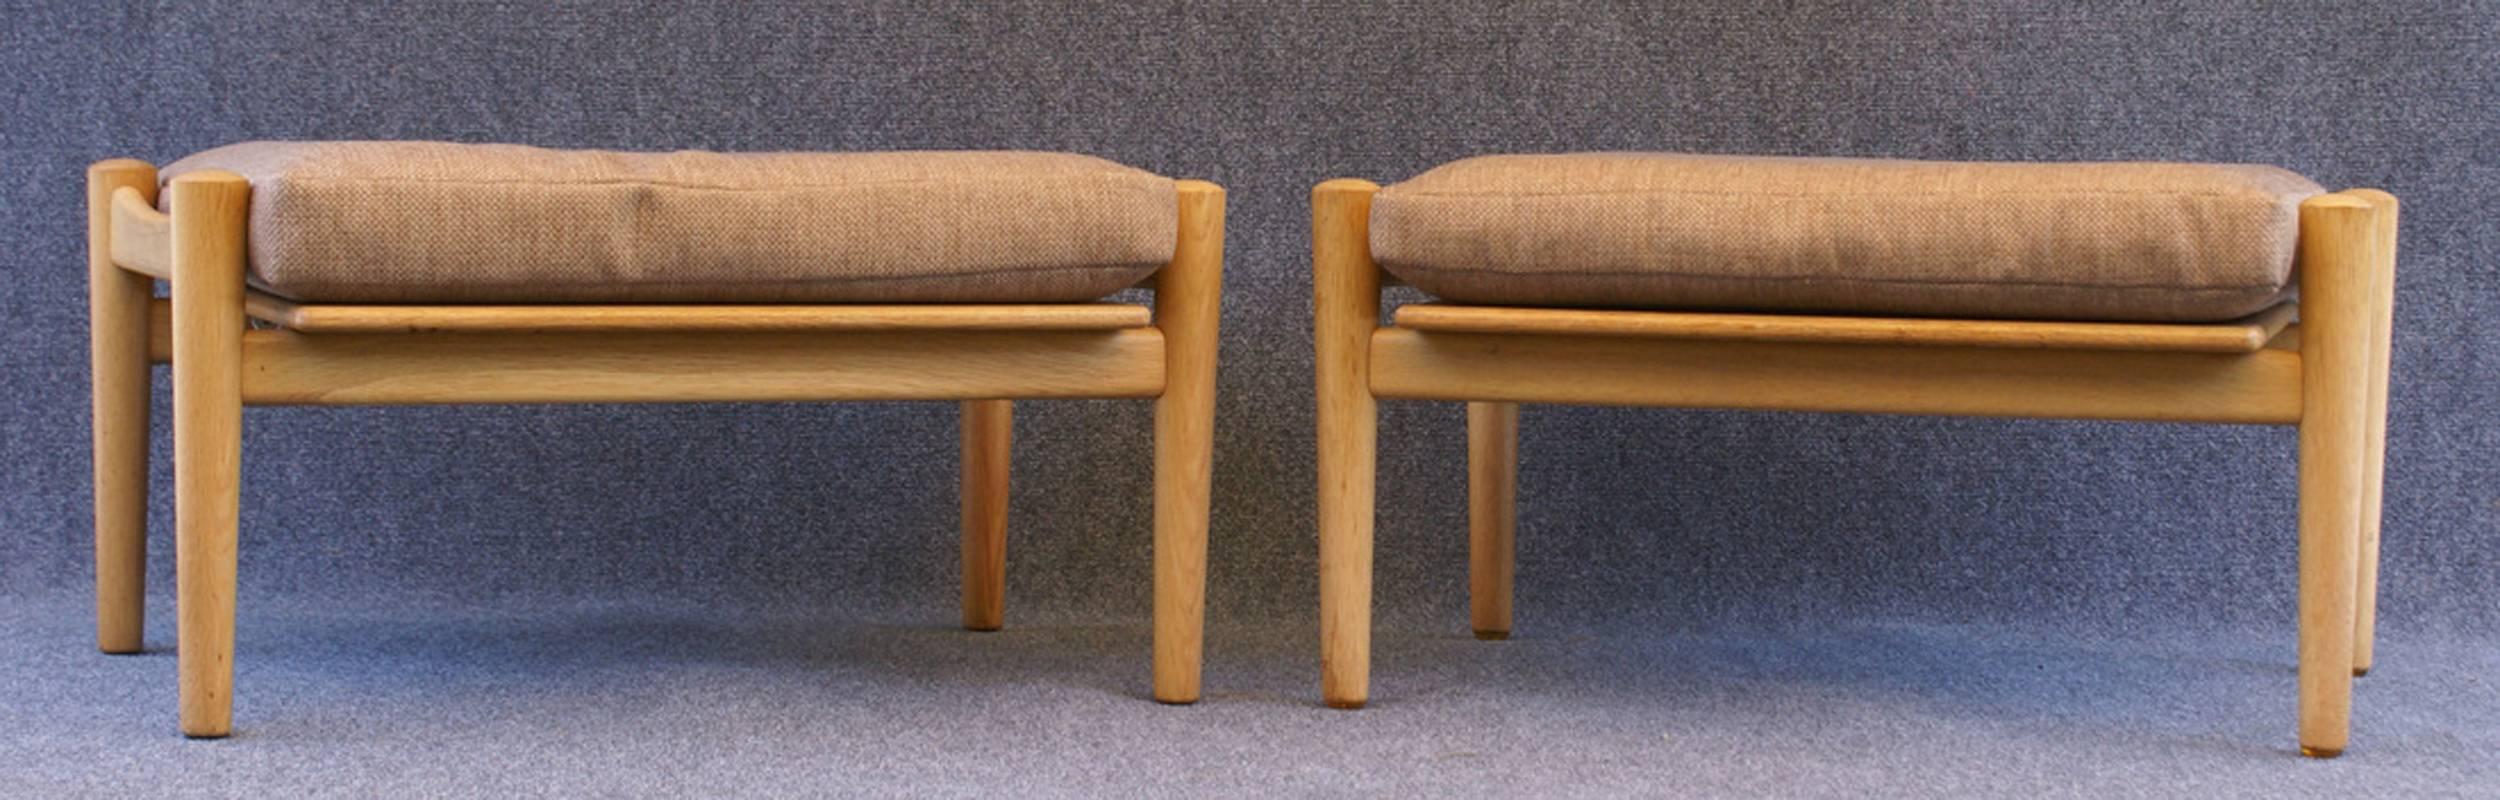 Late 20th Century Pair of High Back Oak GE530 Chairs with Ottomans by Hans J. Wegner for GETAMA